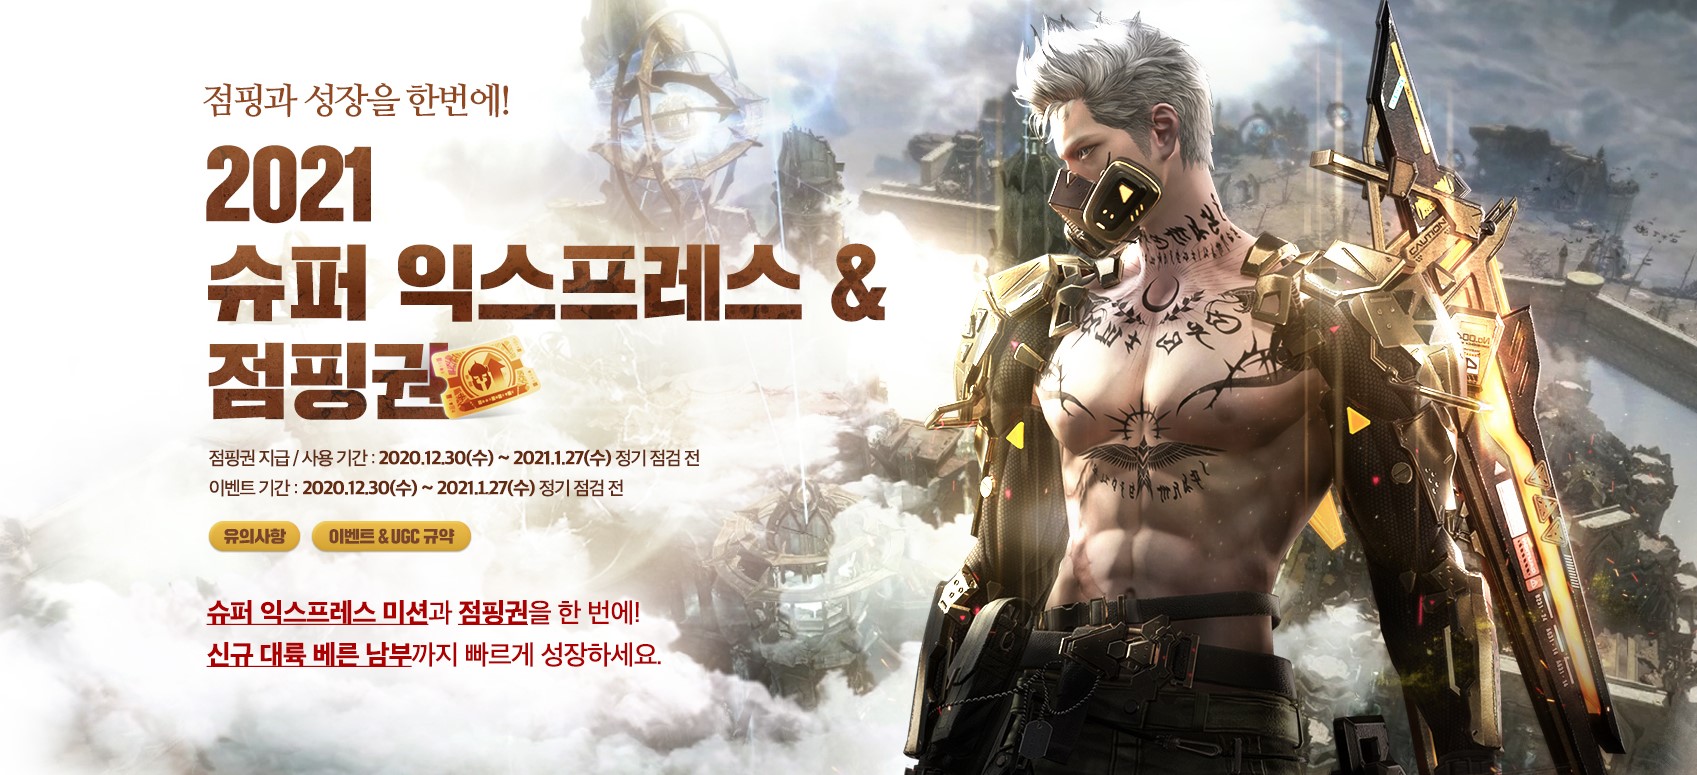 [KR] Jumping Ticket & Express Missions - Get to South Bern fast!